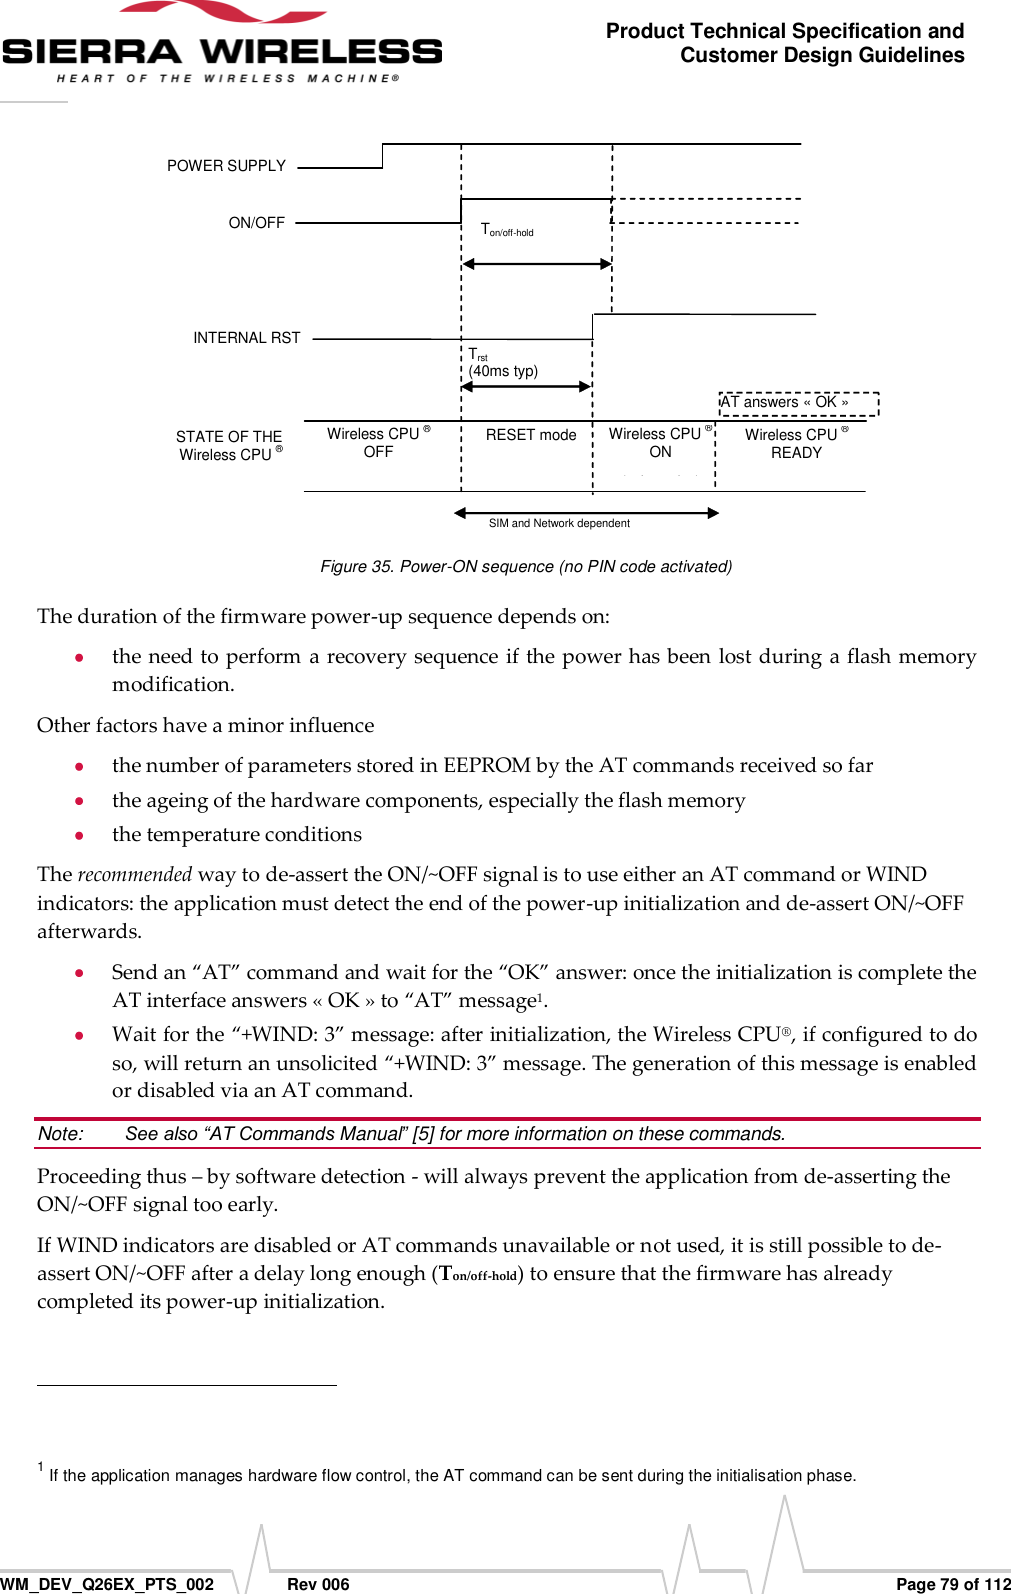      WM_DEV_Q26EX_PTS_002  Rev 006  Page 79 of 112 Product Technical Specification and Customer Design Guidelines  POWER SUPPLY  ON/OFF STATE OF THE Wireless CPU ® Wireless CPU ® OFF IBB+RF &lt; 22µA AT answers « OK » Wireless CPU ® READY Ton/off-hold  (2000ms min) SIM and Network dependent RESET mode IBB+RF=20 to 40mA INTERNAL RST  Trst  (40ms typ) Wireless CPU ® ON IBB+RF&lt;120mA  (no loc. update)  Figure 35. Power-ON sequence (no PIN code activated) The duration of the firmware power-up sequence depends on:  the need to perform a recovery sequence if the power  has been lost during a flash memory modification. Other factors have a minor influence  the number of parameters stored in EEPROM by the AT commands received so far  the ageing of the hardware components, especially the flash memory  the temperature conditions The recommended way to de-assert the ON/~OFF signal is to use either an AT command or WIND indicators: the application must detect the end of the power-up initialization and de-assert ON/~OFF afterwards.  Send an “AT” command and wait for the “OK” answer: once the initialization is complete the AT interface answers « OK » to “AT” message1.   Wait for the “+WIND: 3” message: after initialization, the Wireless CPU®, if configured to do so, will return an unsolicited “+WIND: 3” message. The generation of this message is enabled or disabled via an AT command. Note:   See also “AT Commands Manual” [5] for more information on these commands. Proceeding thus – by software detection - will always prevent the application from de-asserting the ON/~OFF signal too early. If WIND indicators are disabled or AT commands unavailable or not used, it is still possible to de-assert ON/~OFF after a delay long enough (Ton/off-hold) to ensure that the firmware has already completed its power-up initialization.                                                          1 If the application manages hardware flow control, the AT command can be sent during the initialisation phase. 